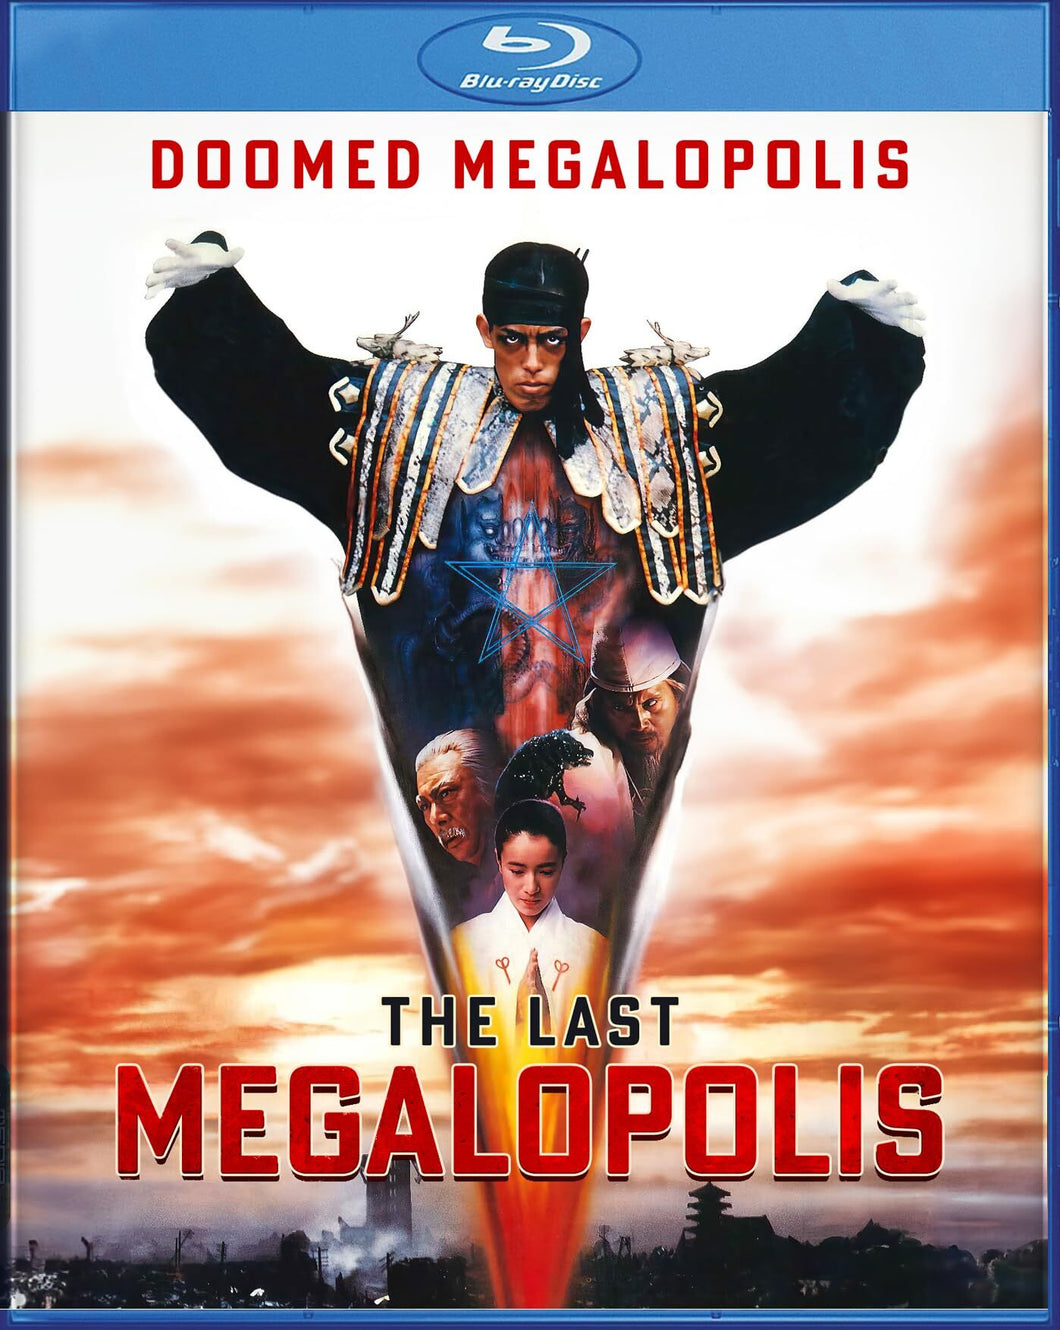 Doomed Megalopolis: The Last Megalopolis (1988) - front cover